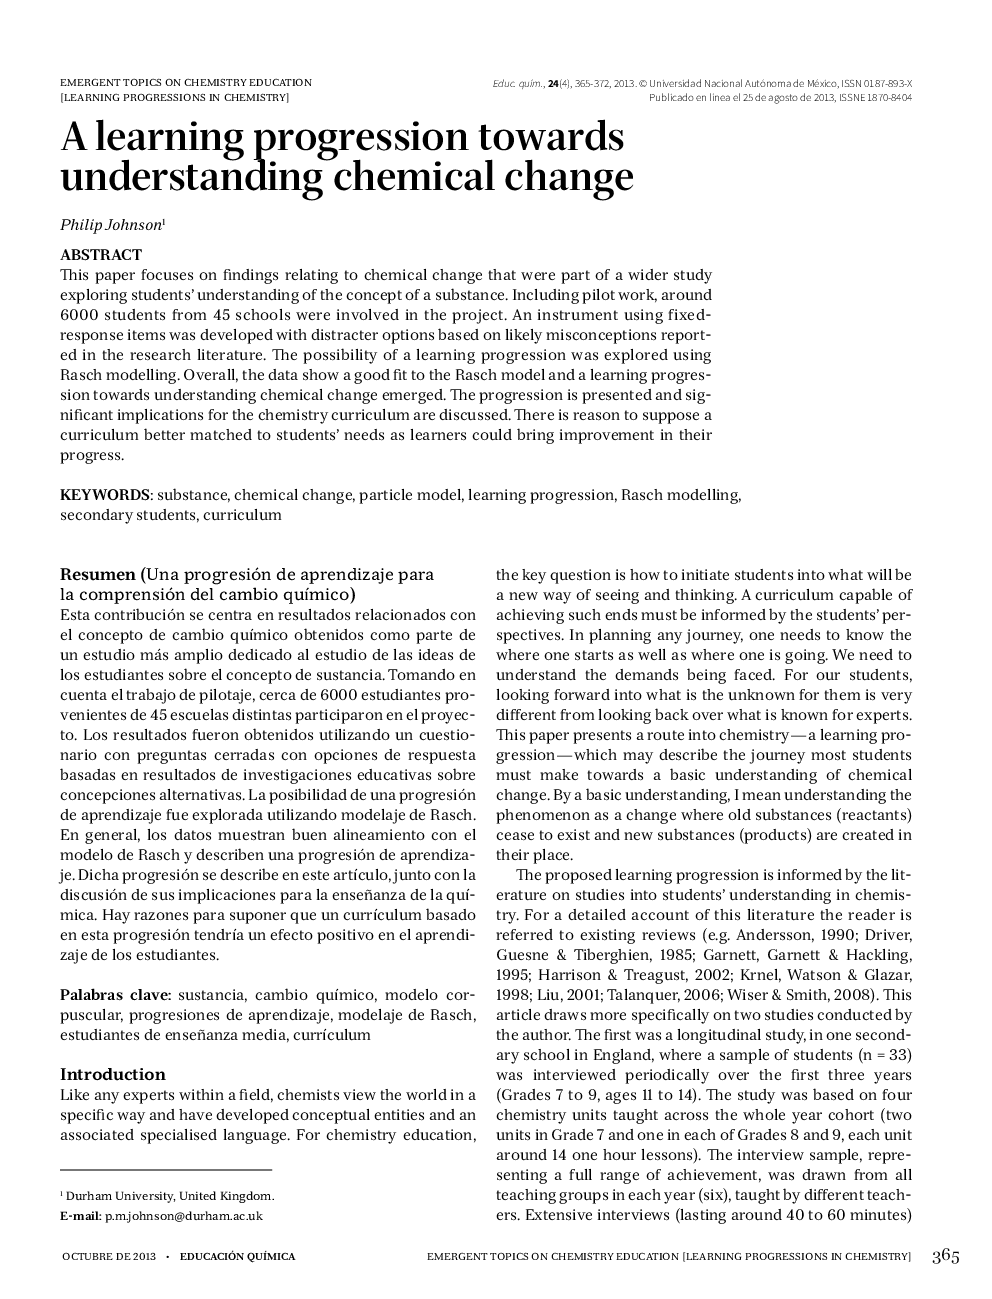 A learning progression towards understanding chemical change